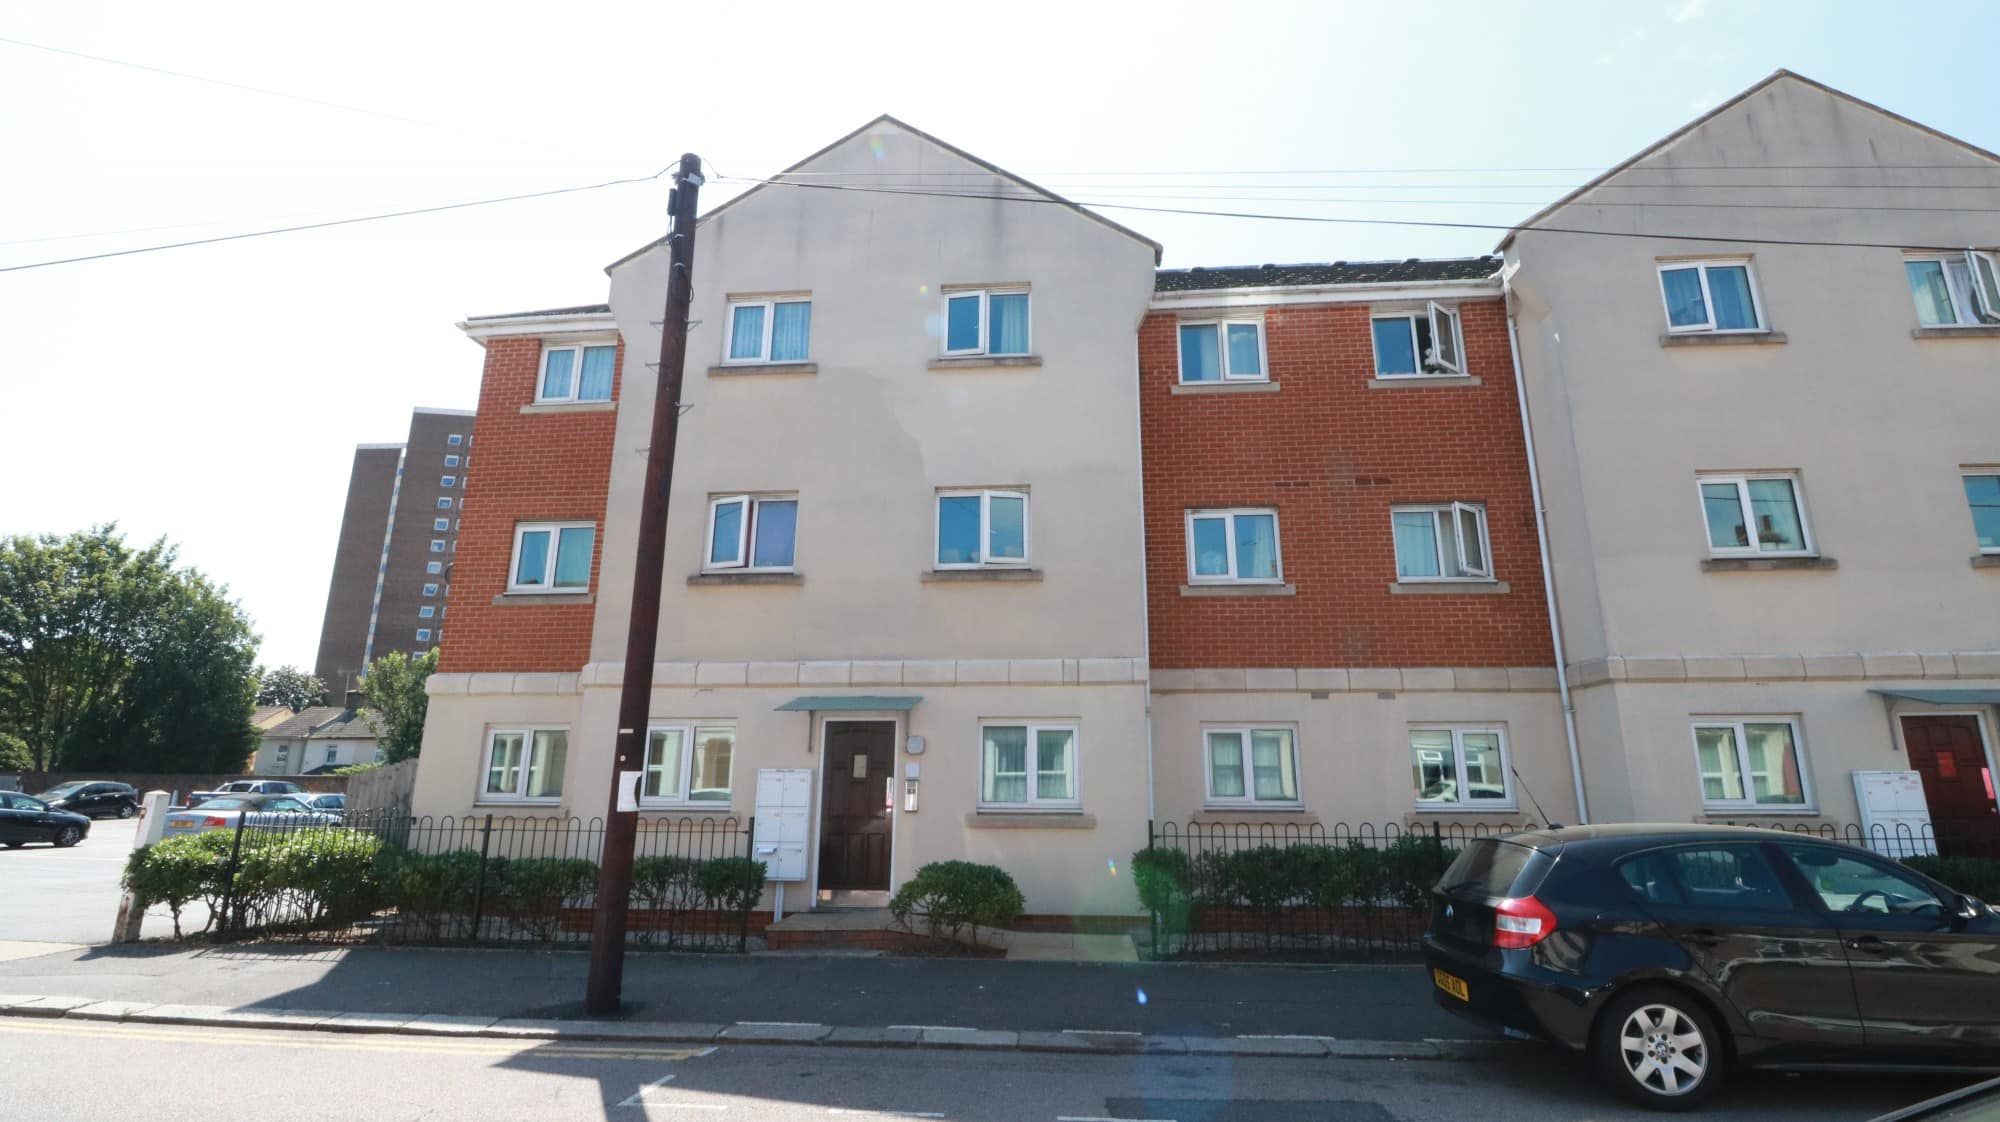 Flat 1 60 Guildford Road, Royal Court, Southend-On-Sea, 60 Guildford Road, SS2 5BH